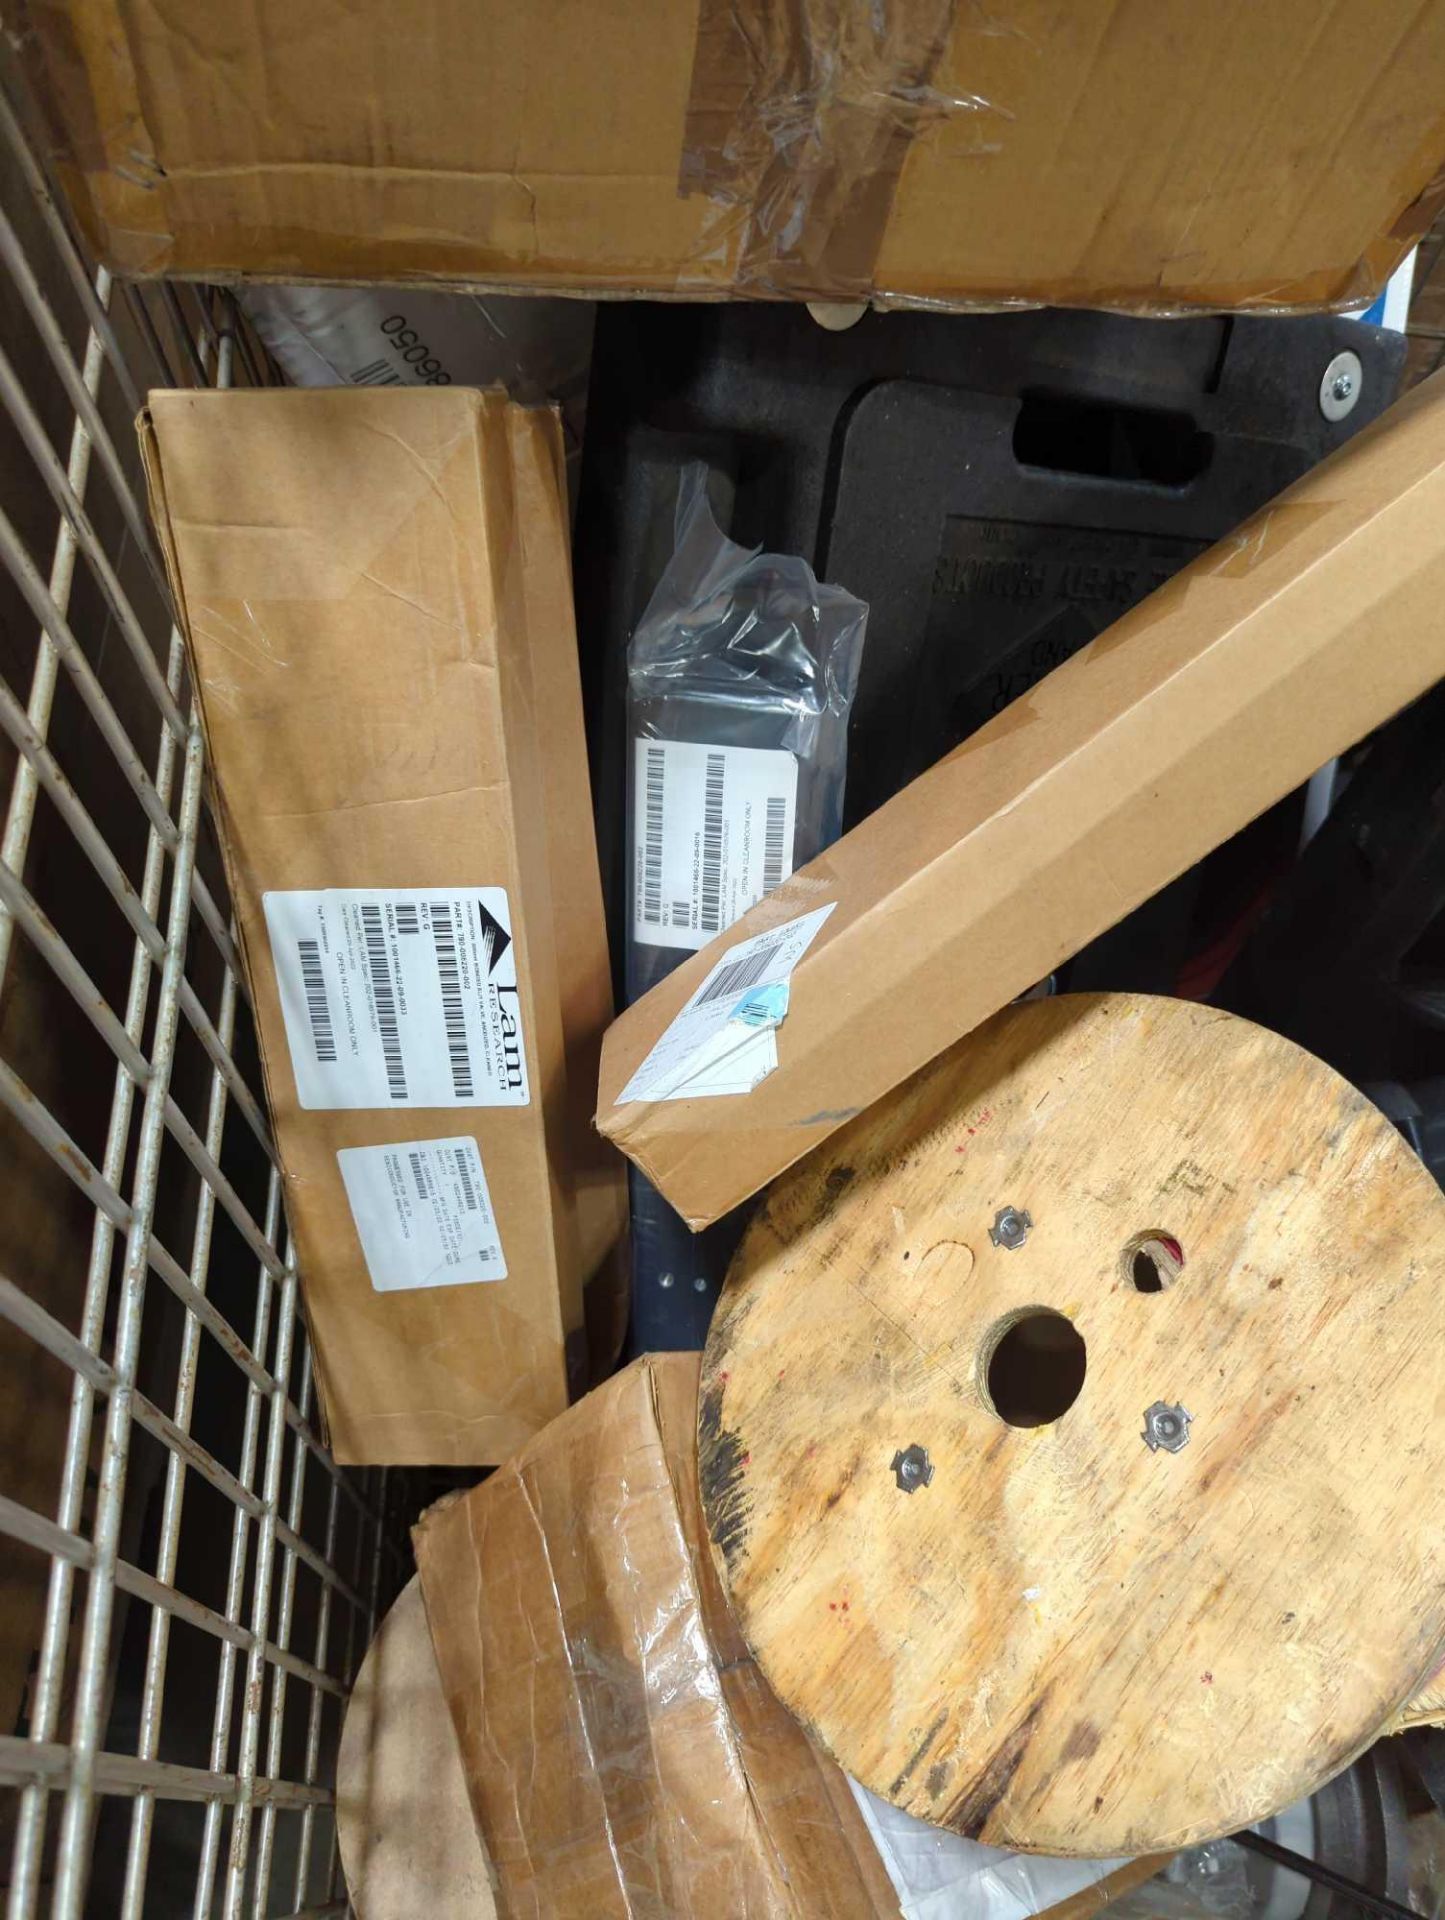 Westward 10 Ton Hydraulic Ram System Kit, and more - Image 5 of 6